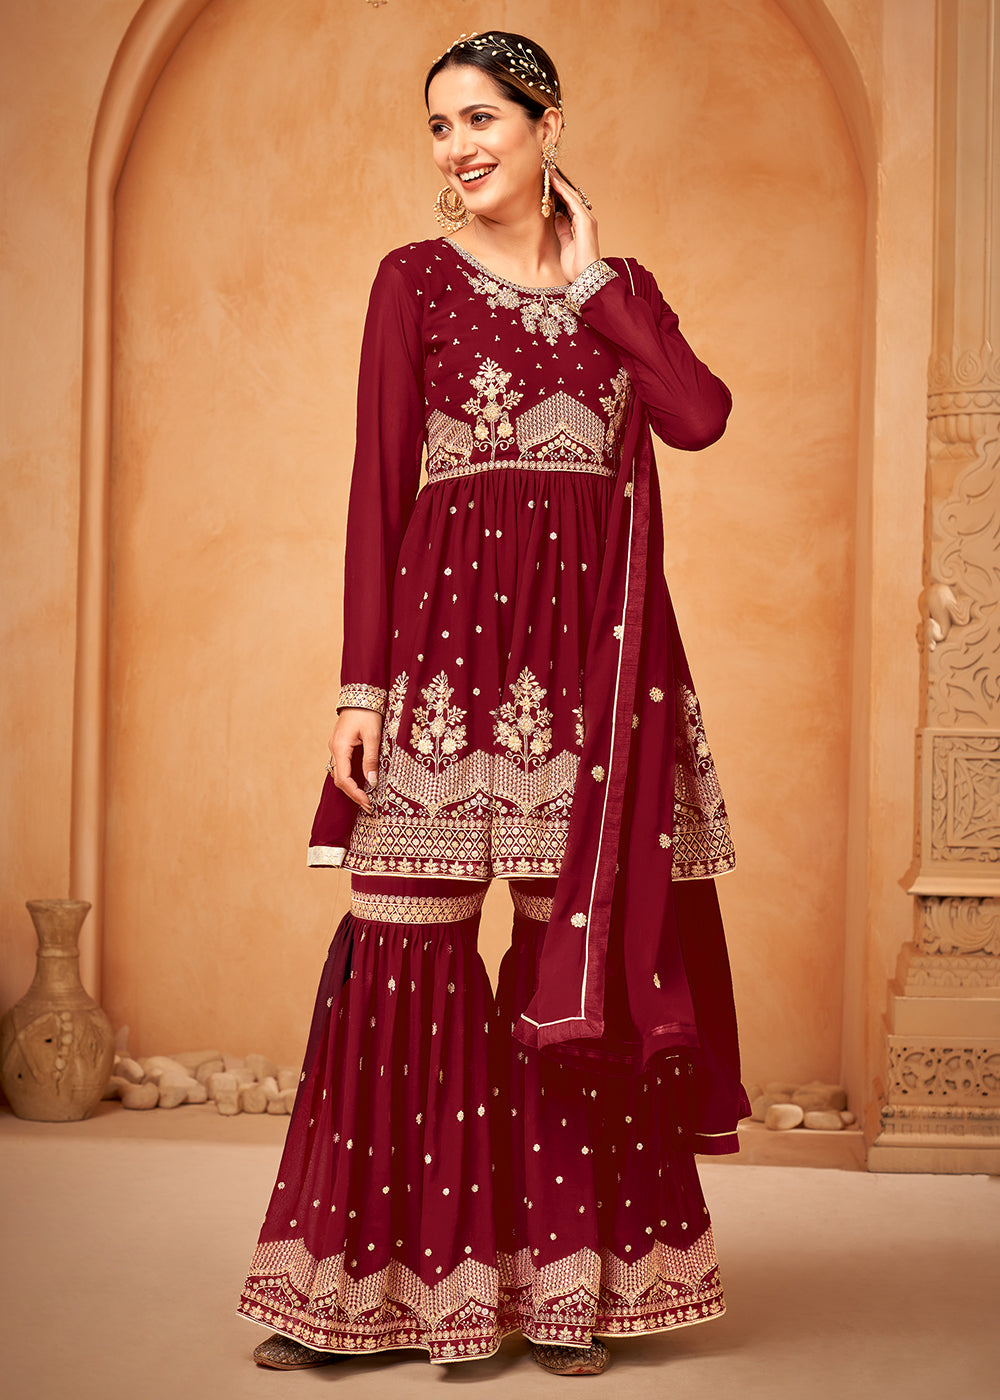 Shop Now Appealing Maroon Embroidered Wedding Festive Gharara Suit Online at Empress Clothing in USA, UK, Canada, Germany & Worldwide. 